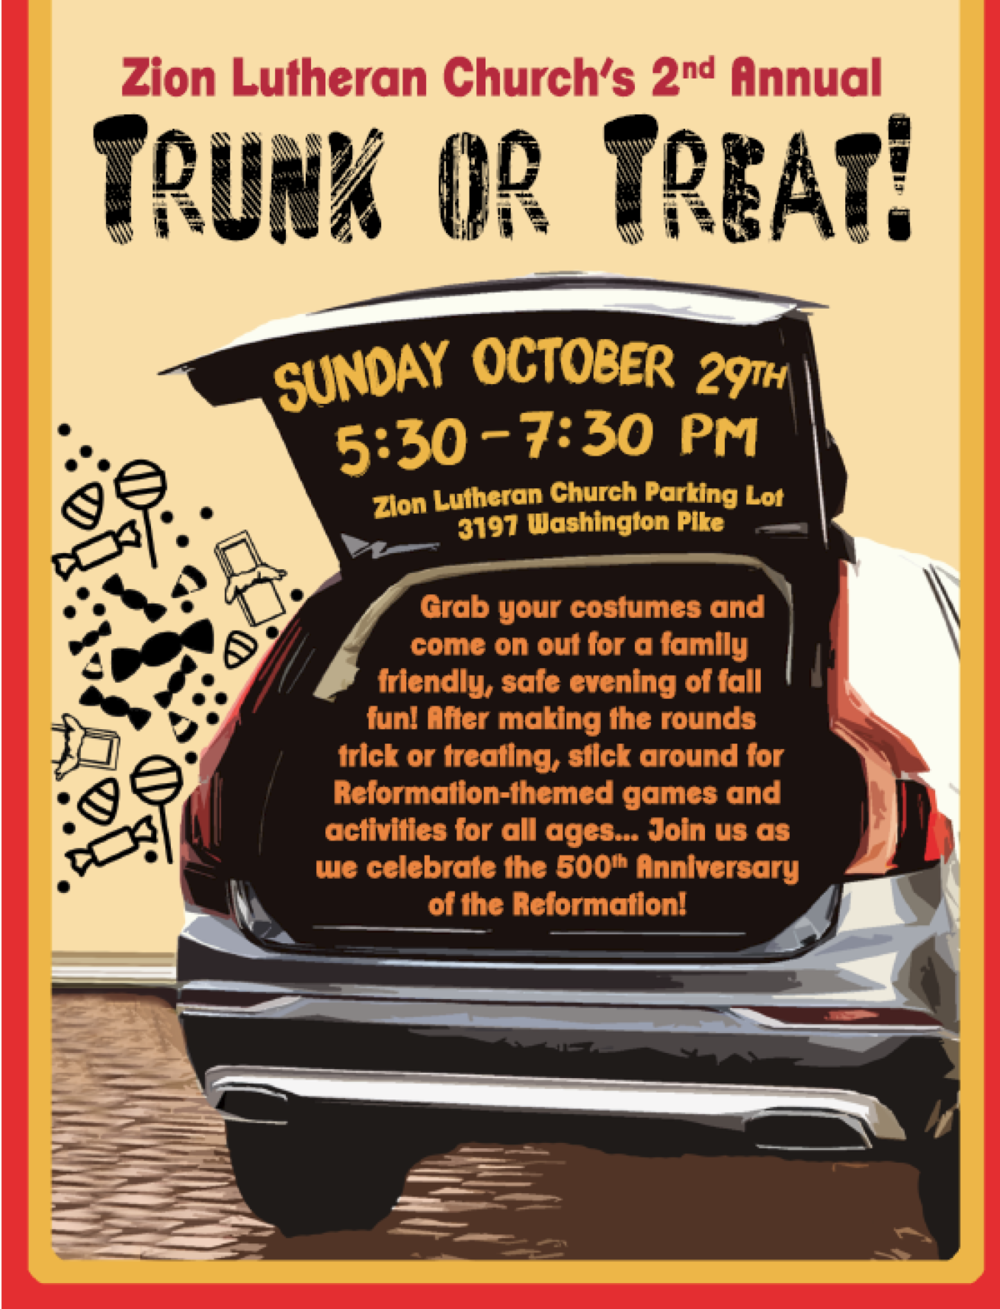 church trunk or treat flyer template, trunk or treat flyer templates free downloads, free printable trunk or treat flyer template, trunk or treat flyer ideas